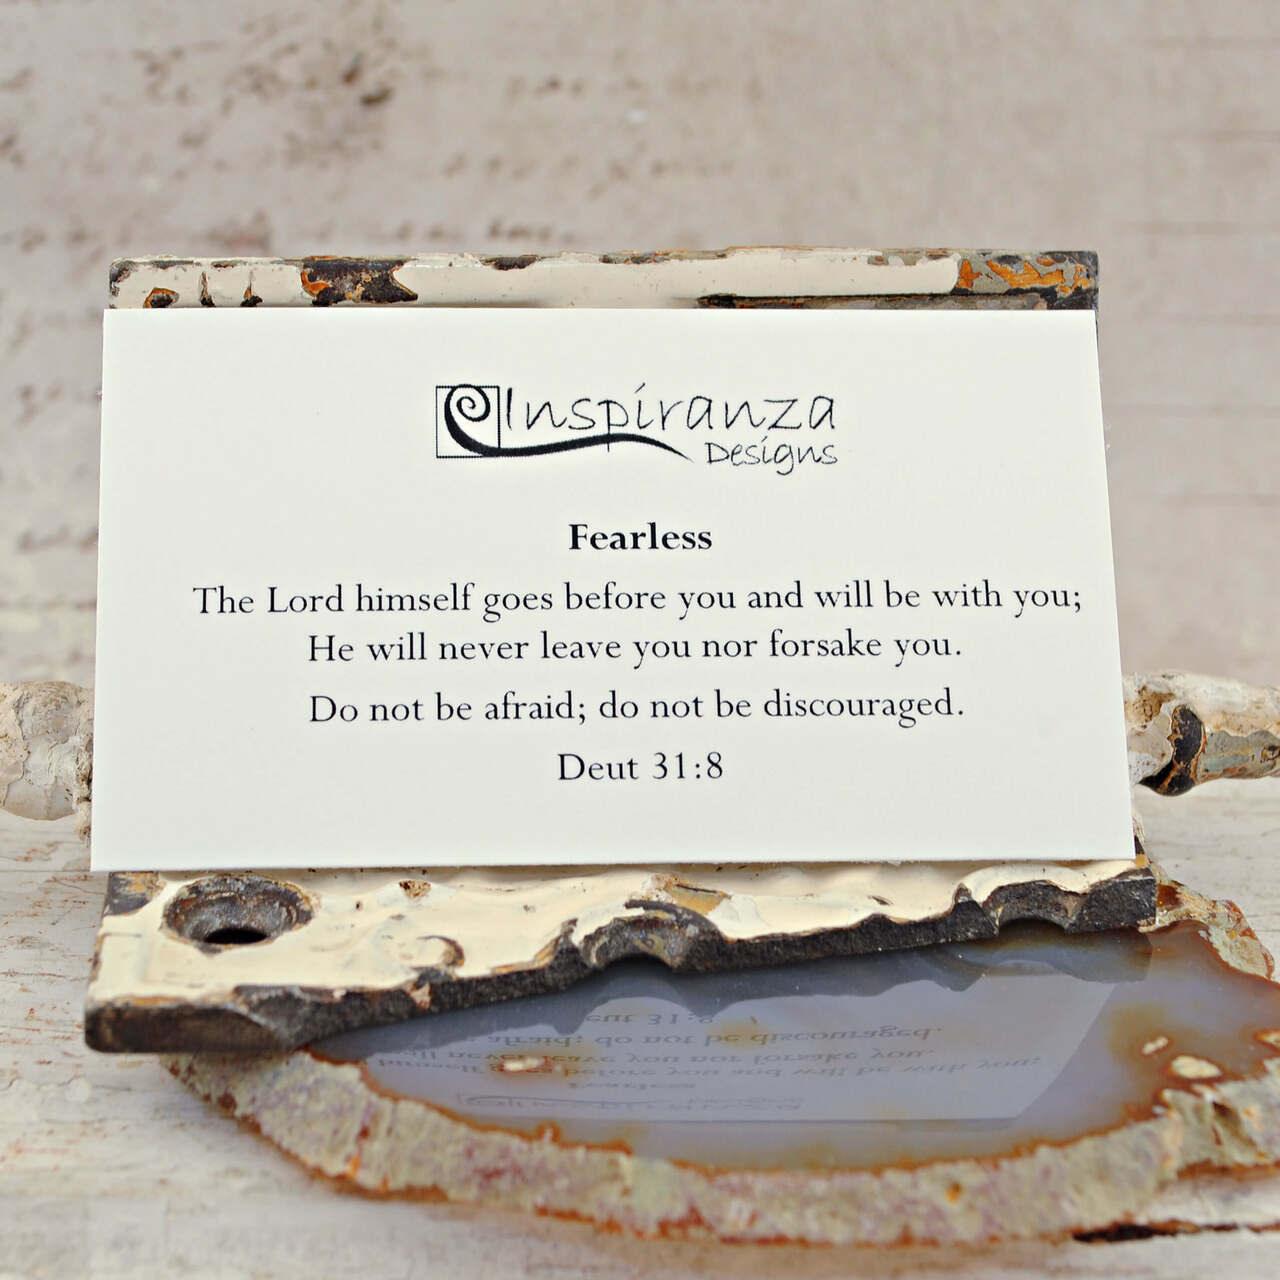 Includes inspirational message card: The Lord himself goes before you and will be with you; he will never leave you nor forsake you. Do not be afraid; do not be discouraged.  Deuteronomy 31:8